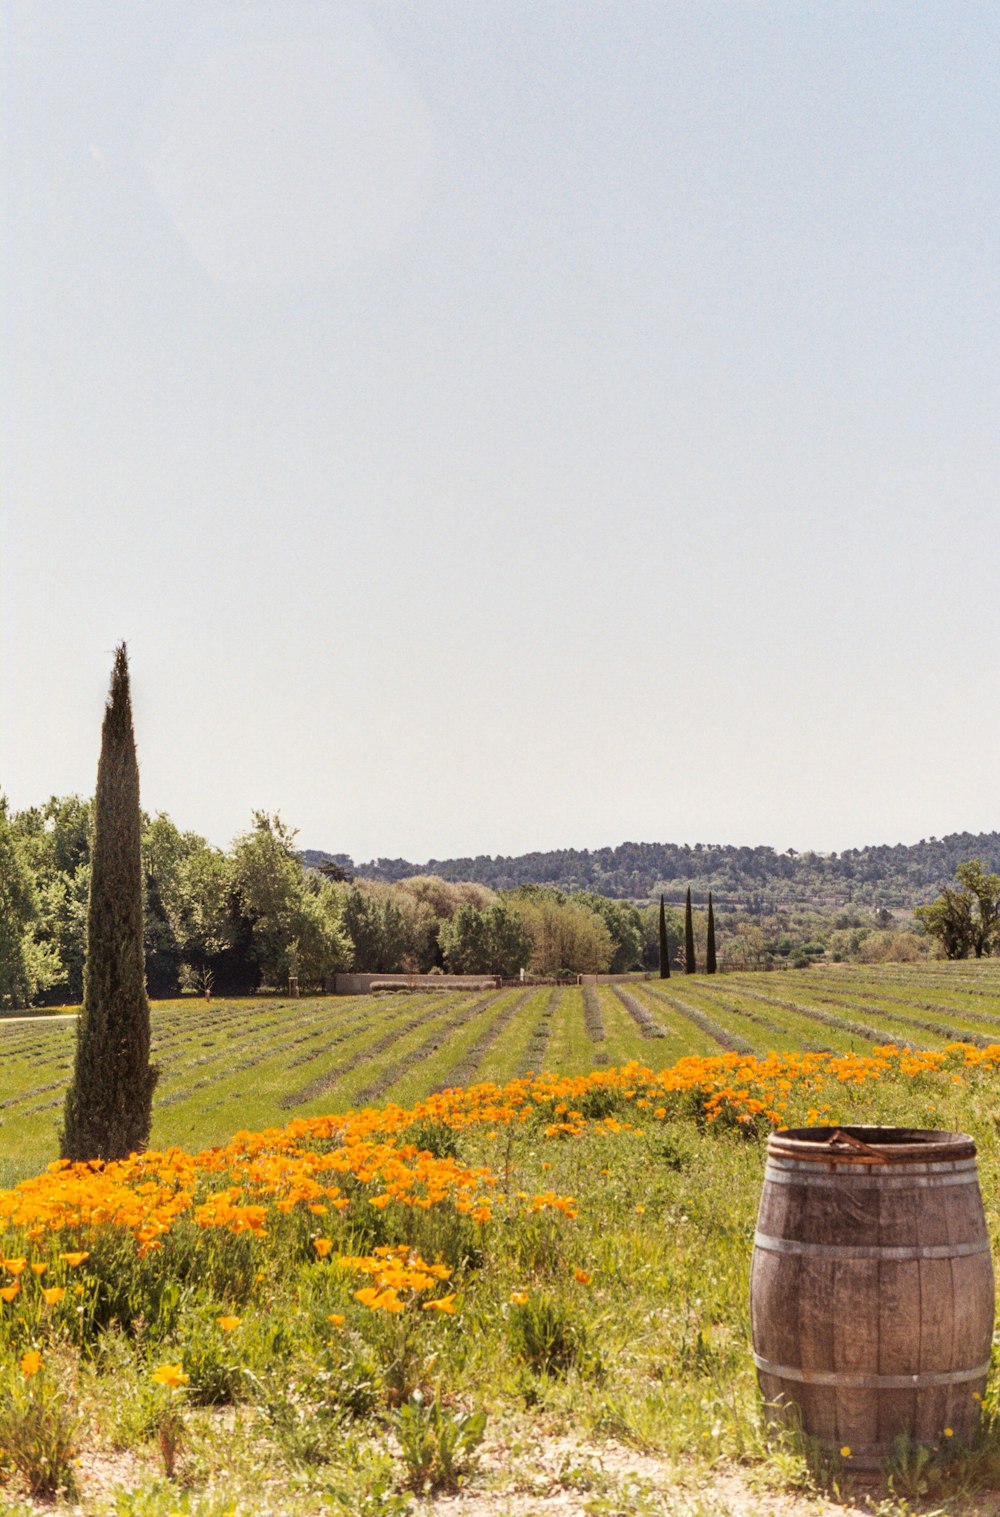 a field of flowers and a barrel in the foreground